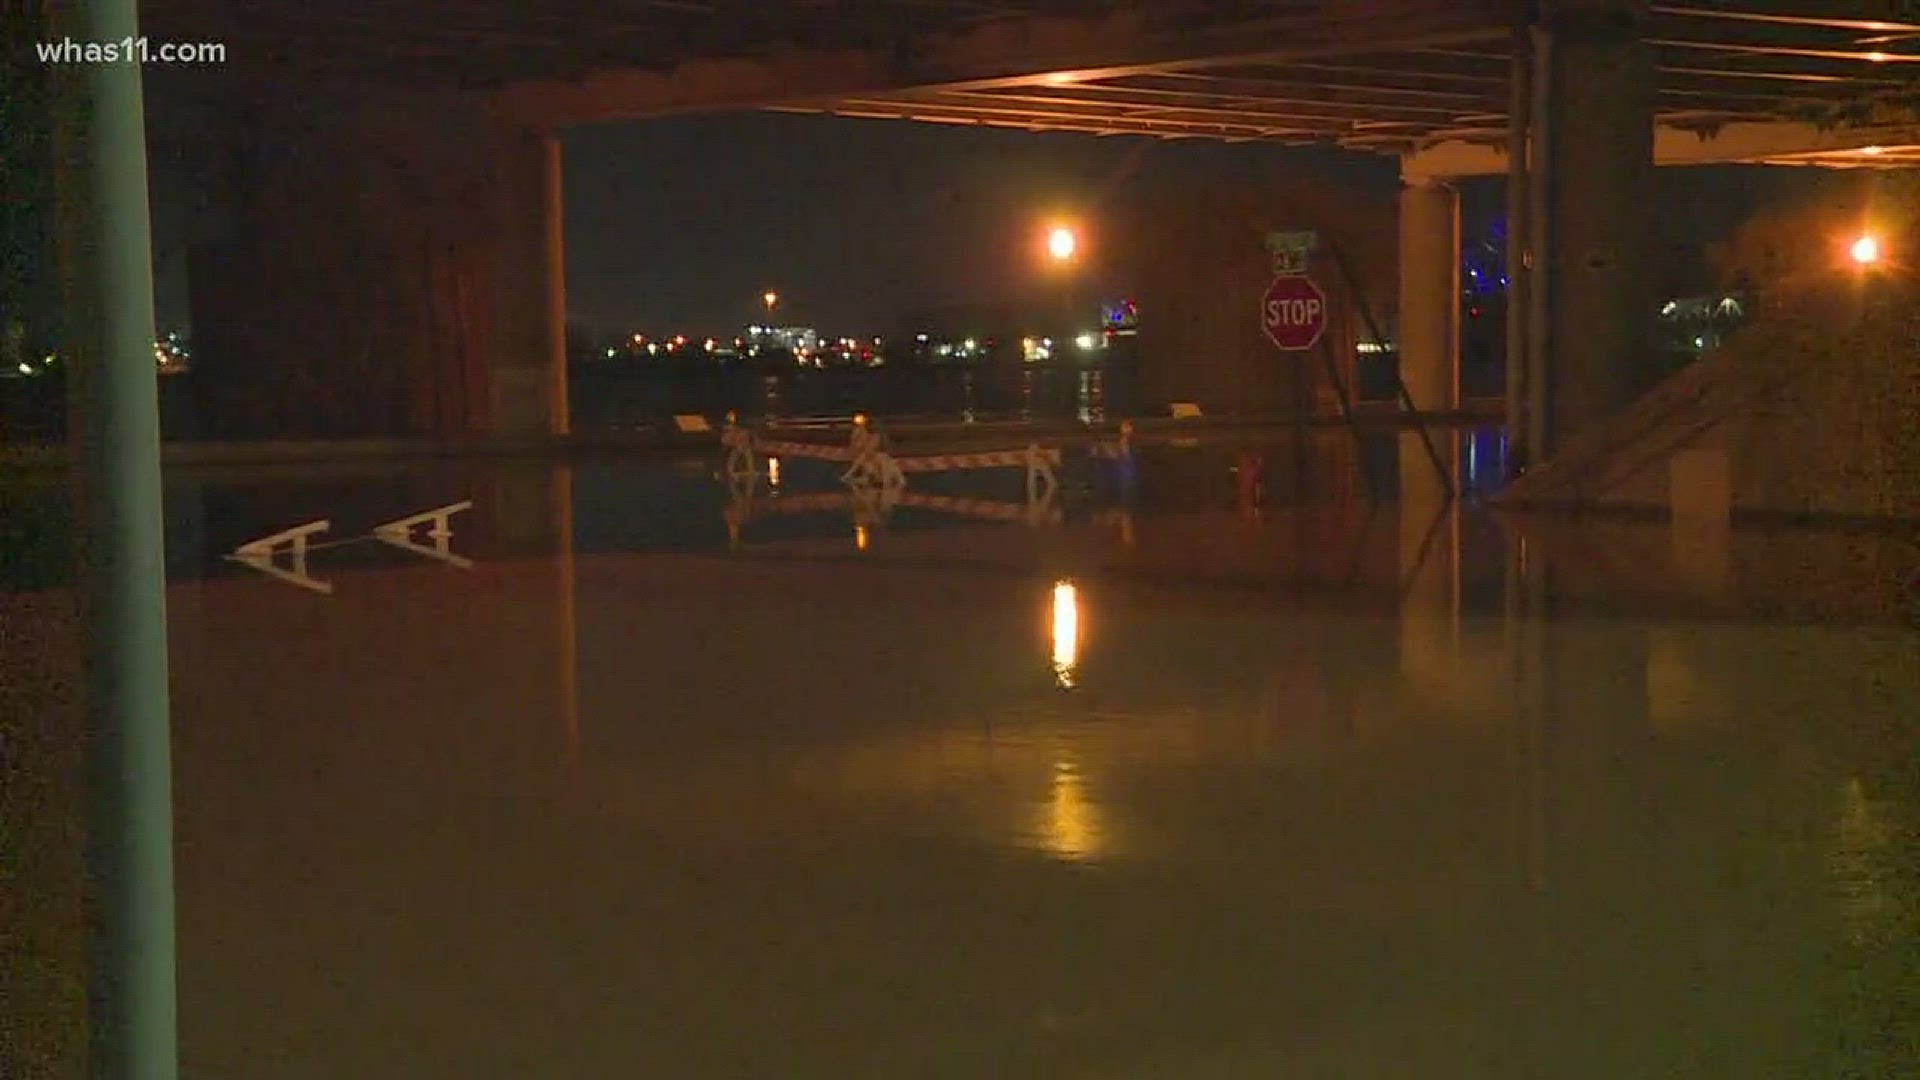 Before the rain hits on Wednesday, some areas in downtown Louisville are already flooded